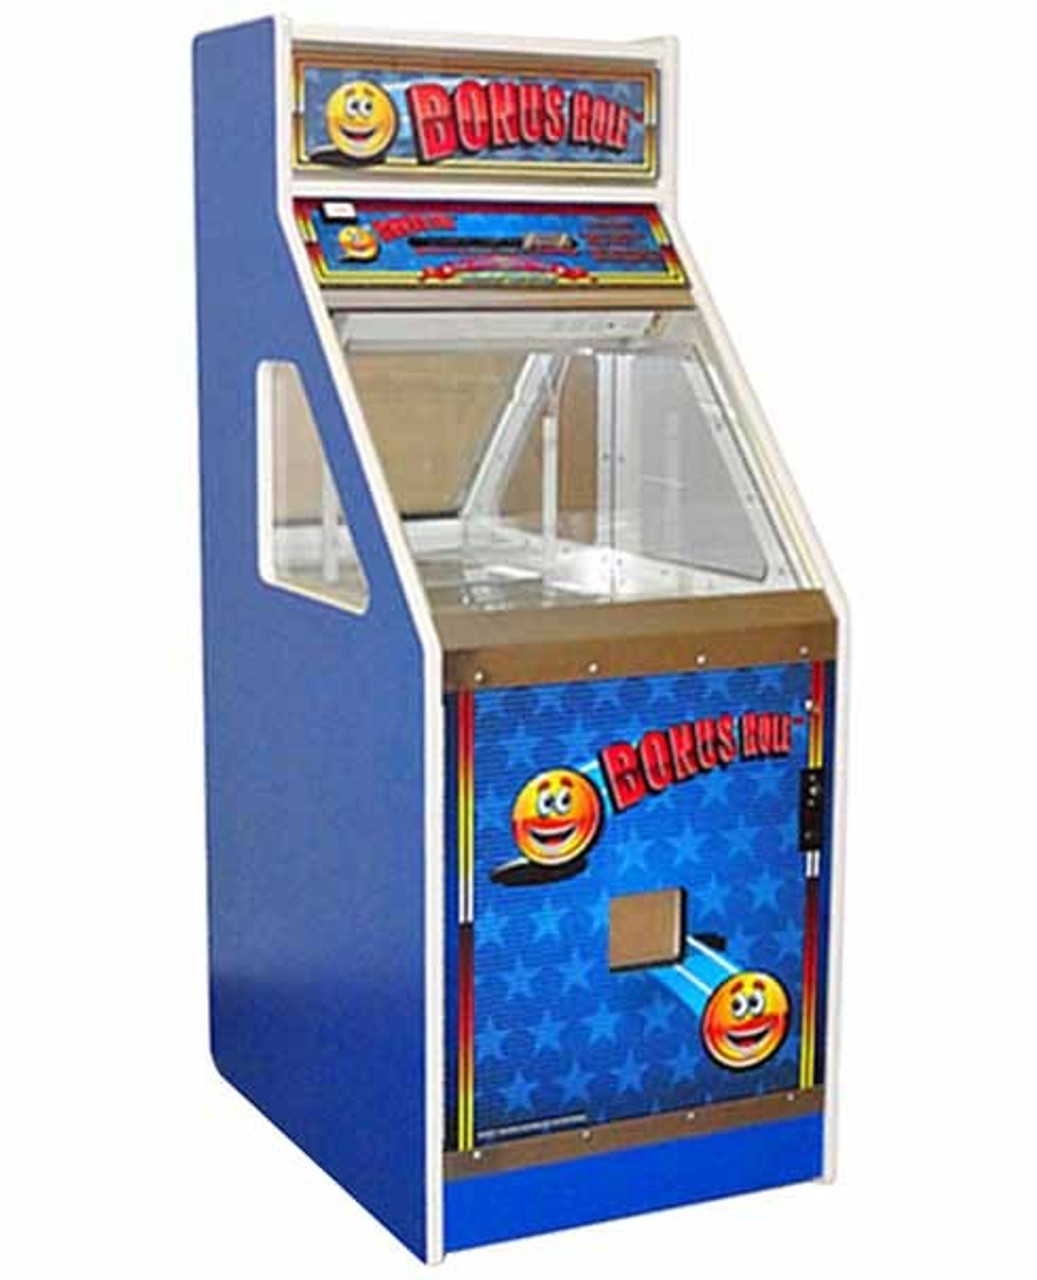 Really addictive': Arcade coin-pusher machines hook some patrons into  splurging hundreds of dollars - TODAY